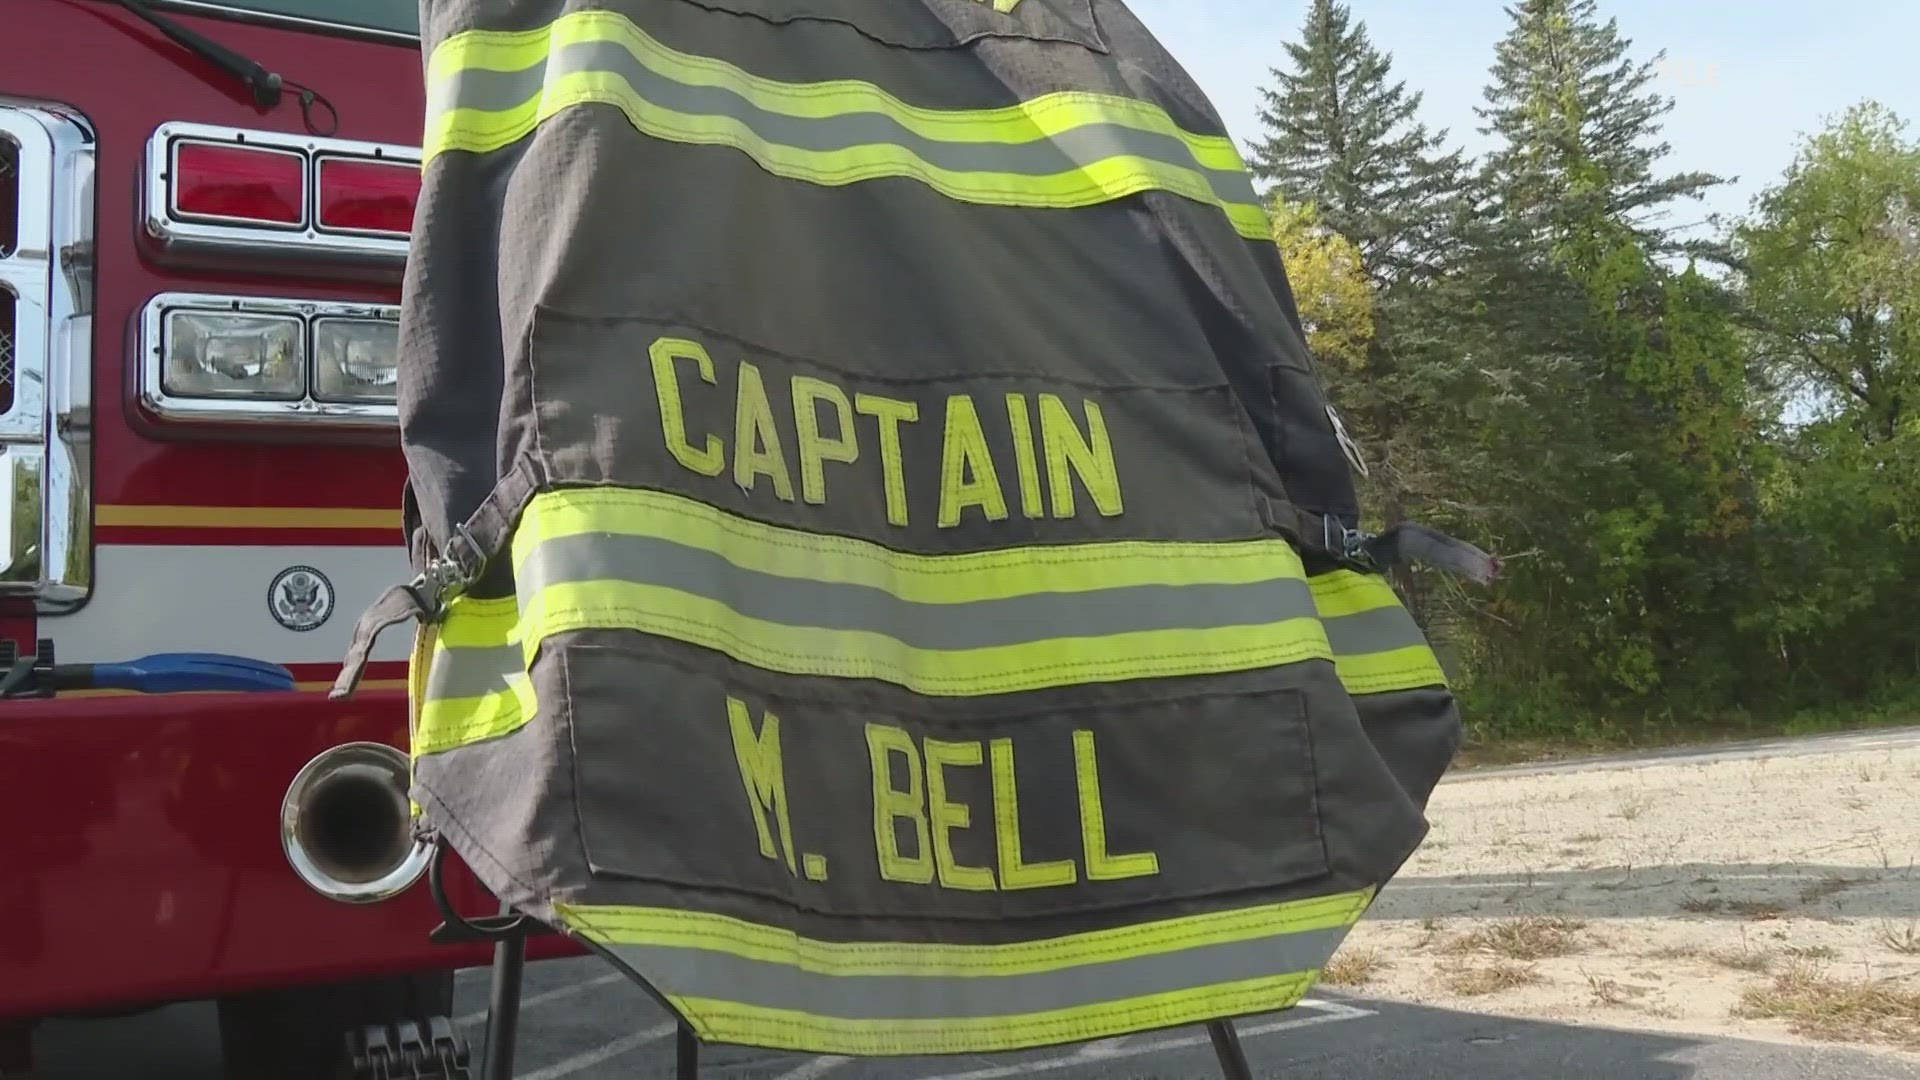 Bell died four years ago Sept. 16. Six other firefighters and a maintenance worker were also injured.